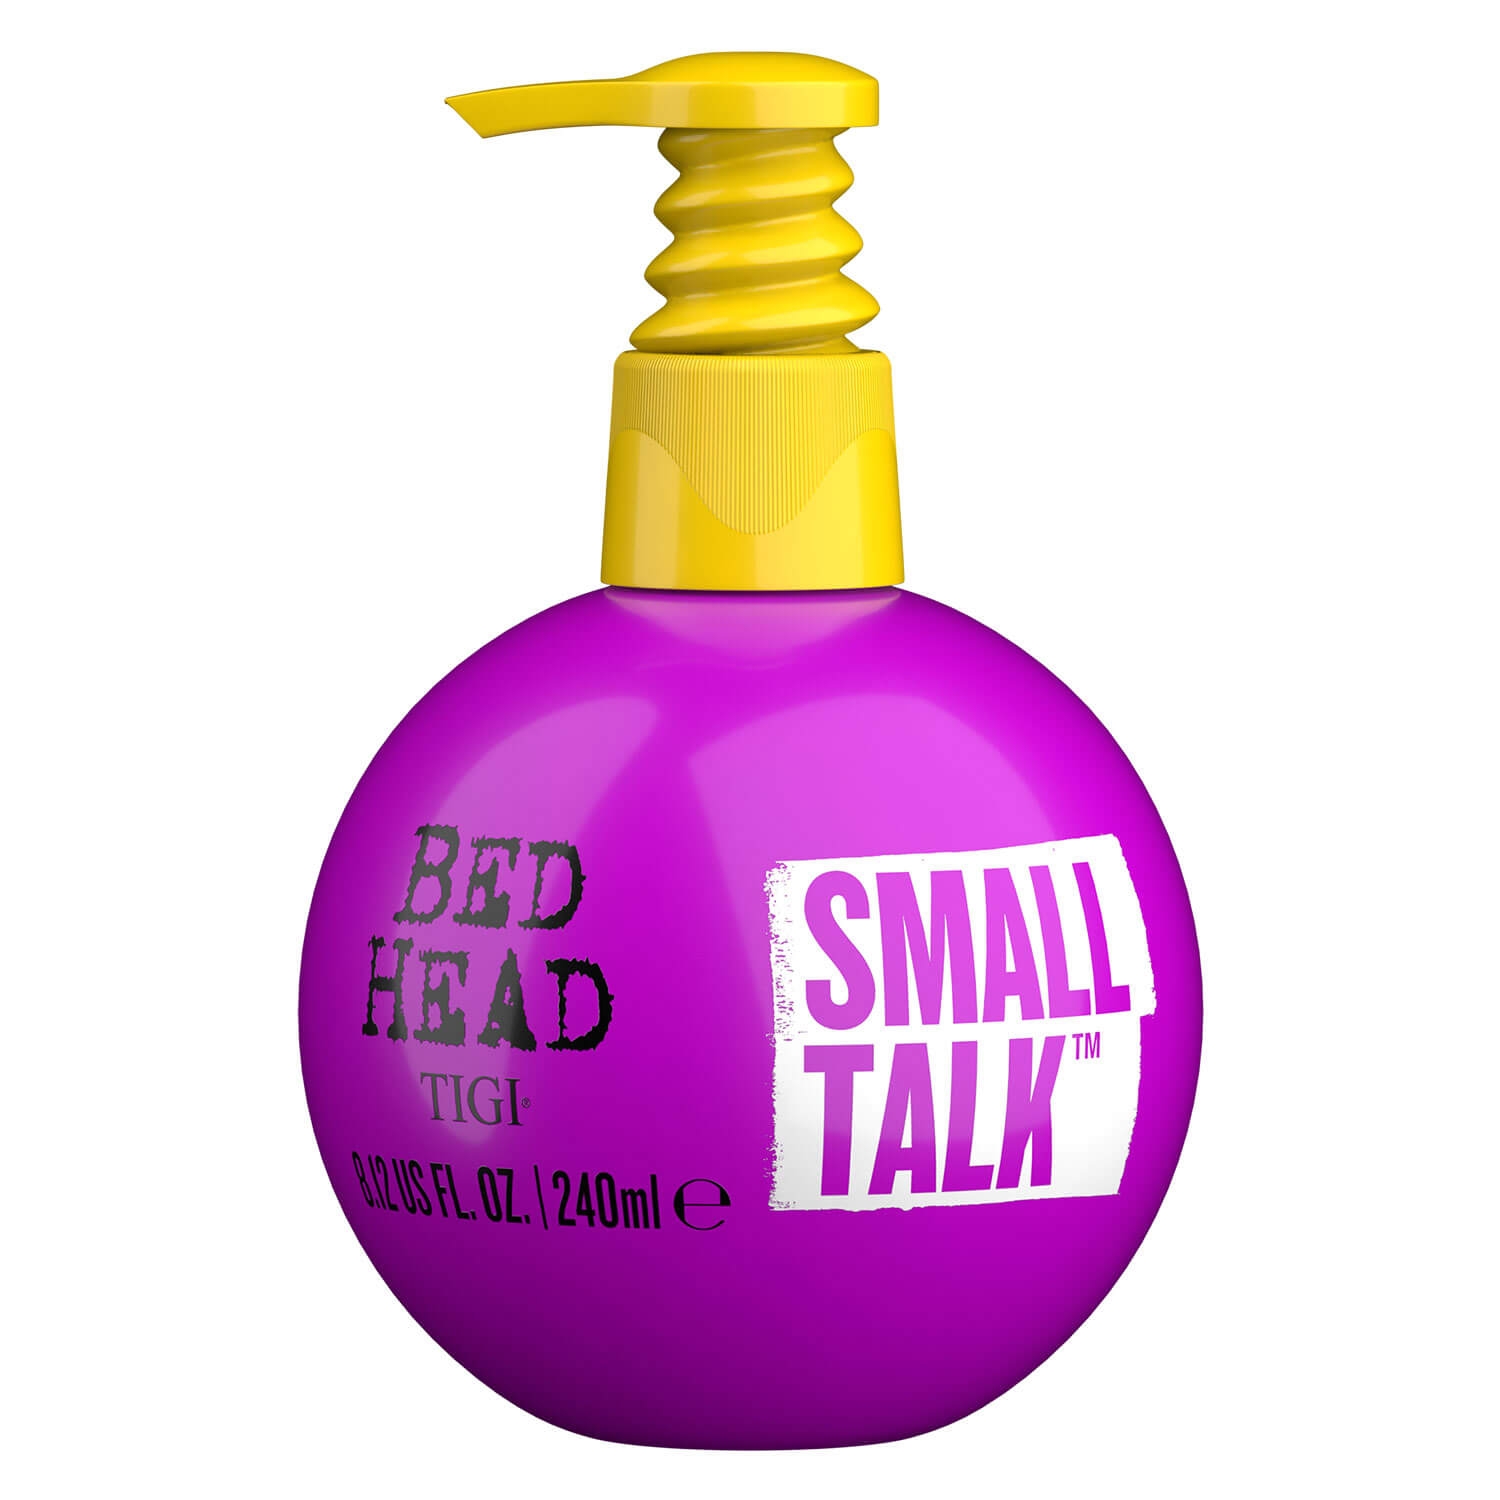 Product image from Bed Head - Small Talk